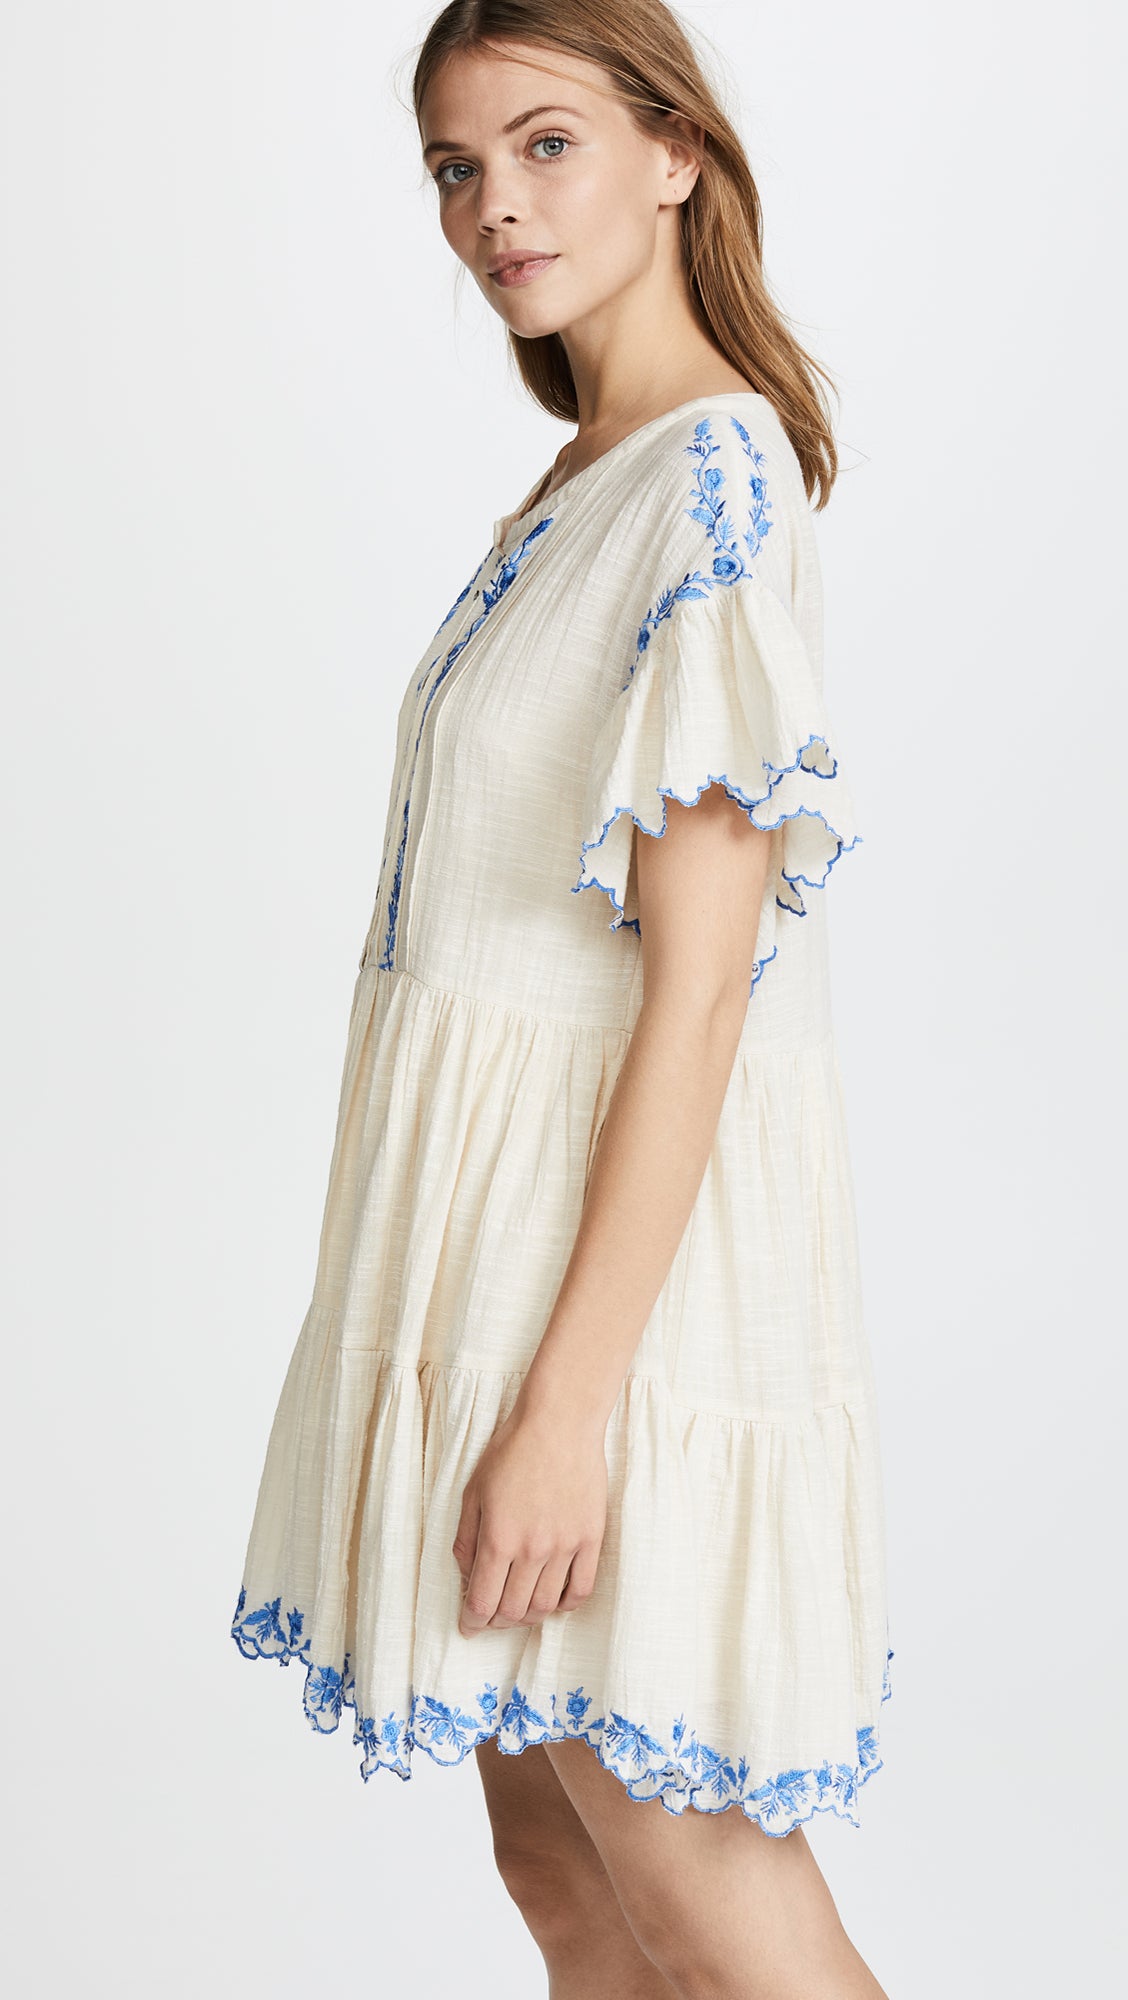 FREE PEOPLE Santiago Embroidered Mini Endless Summer Dress – Pit-a-Pats.com